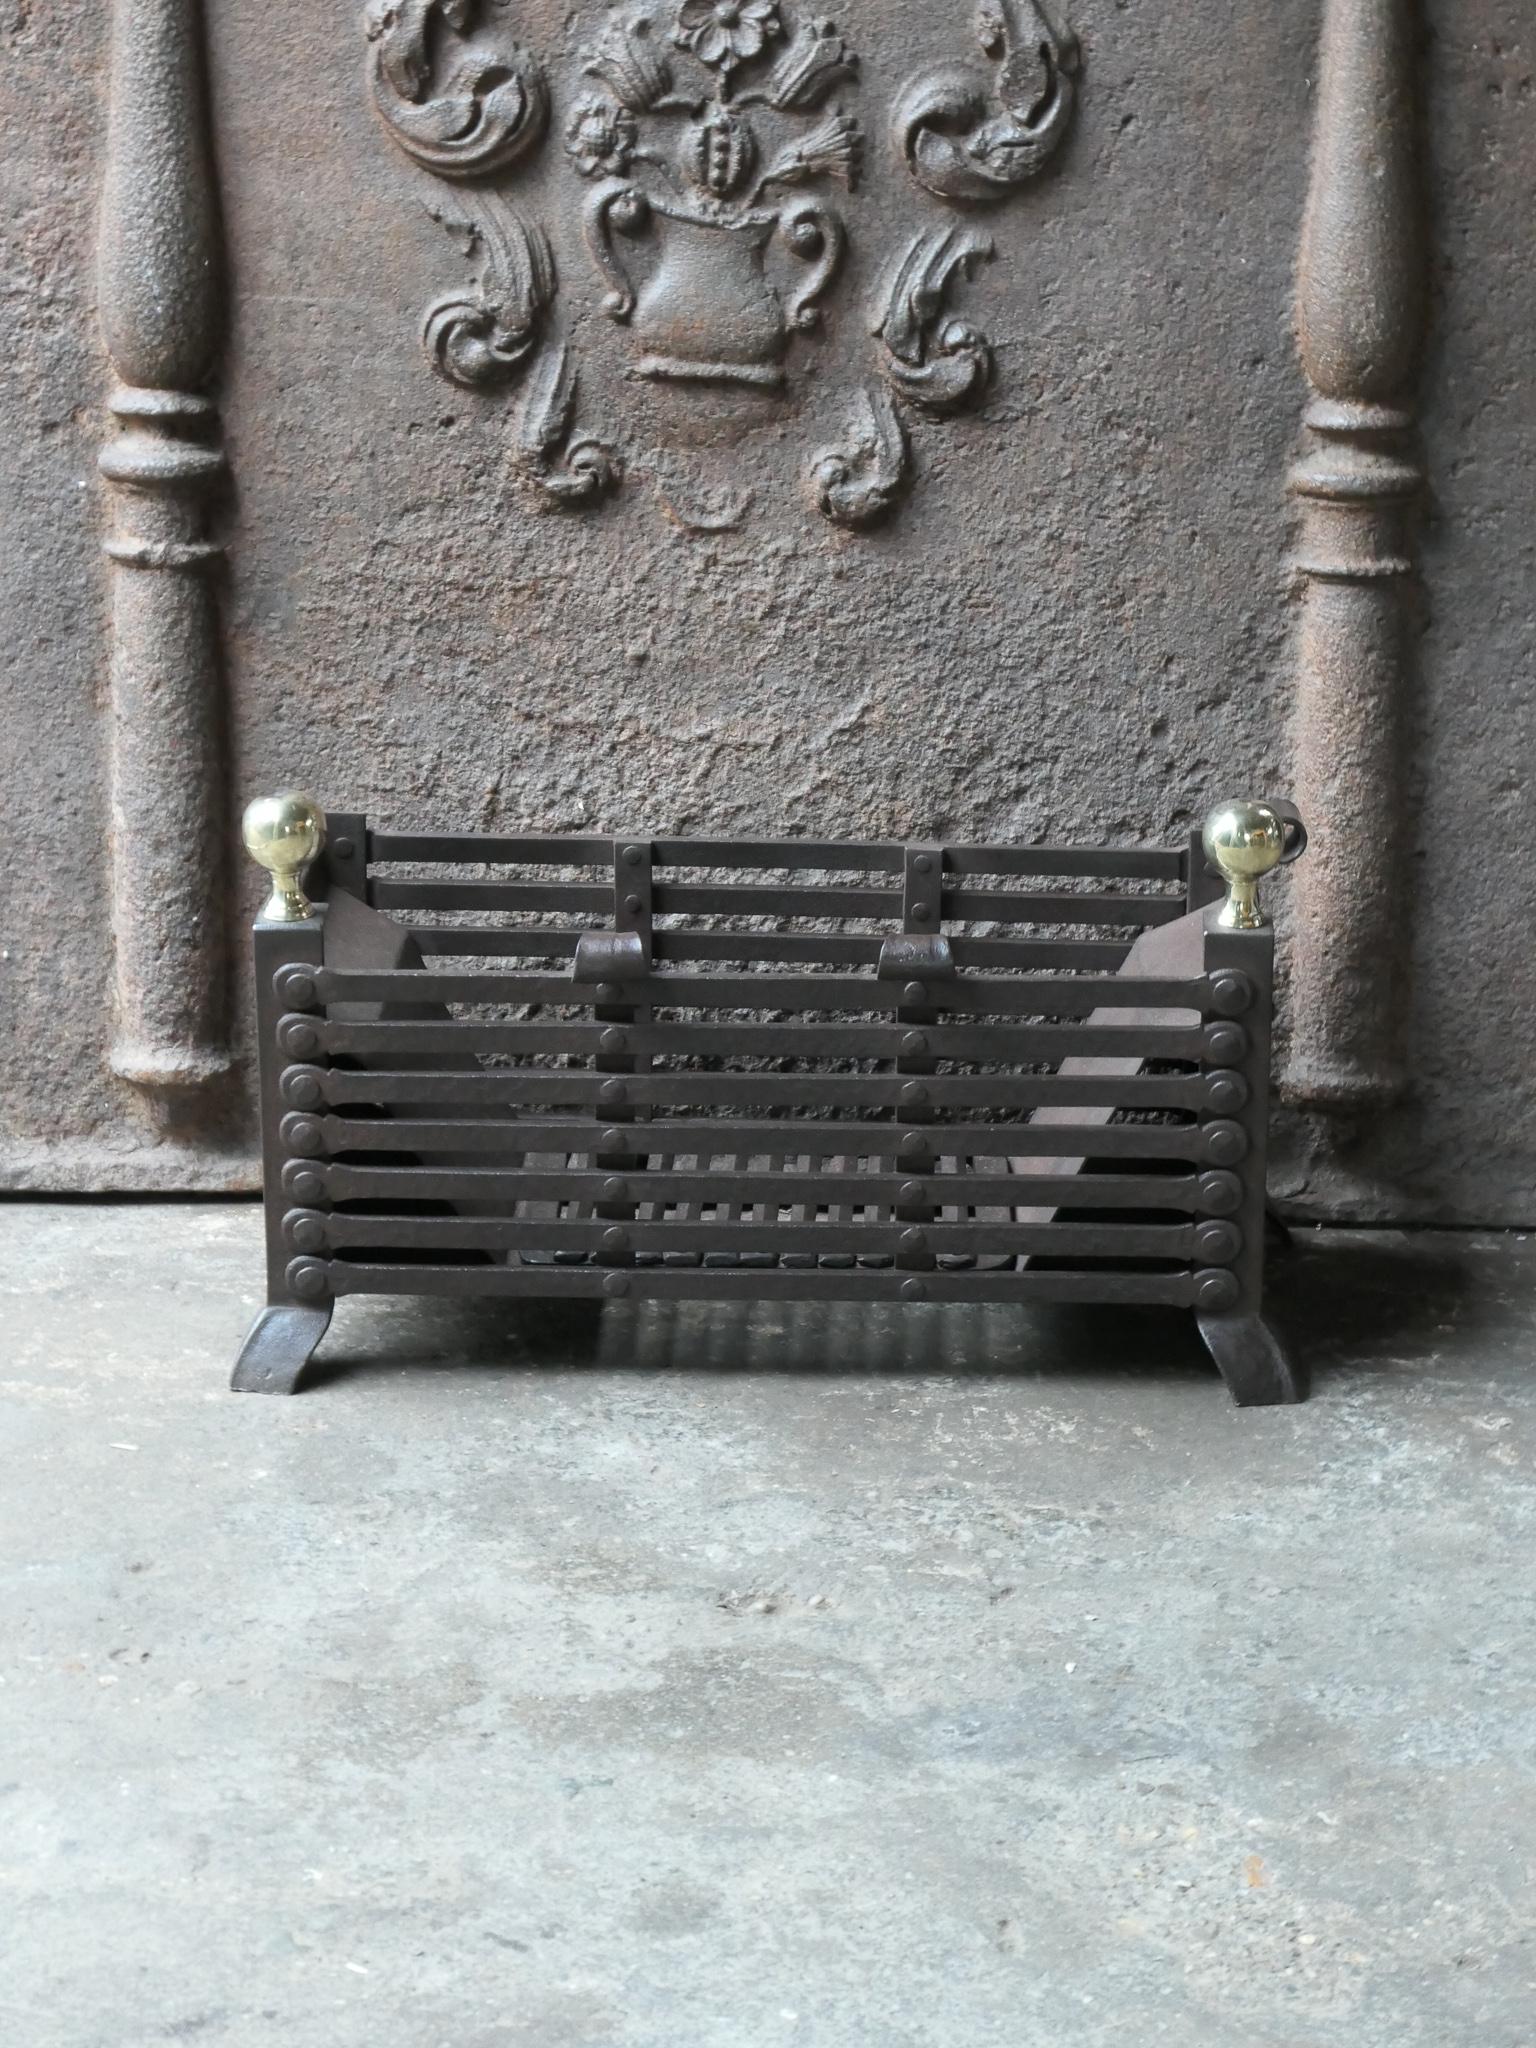 19th century English Victorian fireplace basket, fire grate made of wrought iron, cast iron and polished brass. The fireplace grate is in a good condition and is fit for use in the fireplace.







